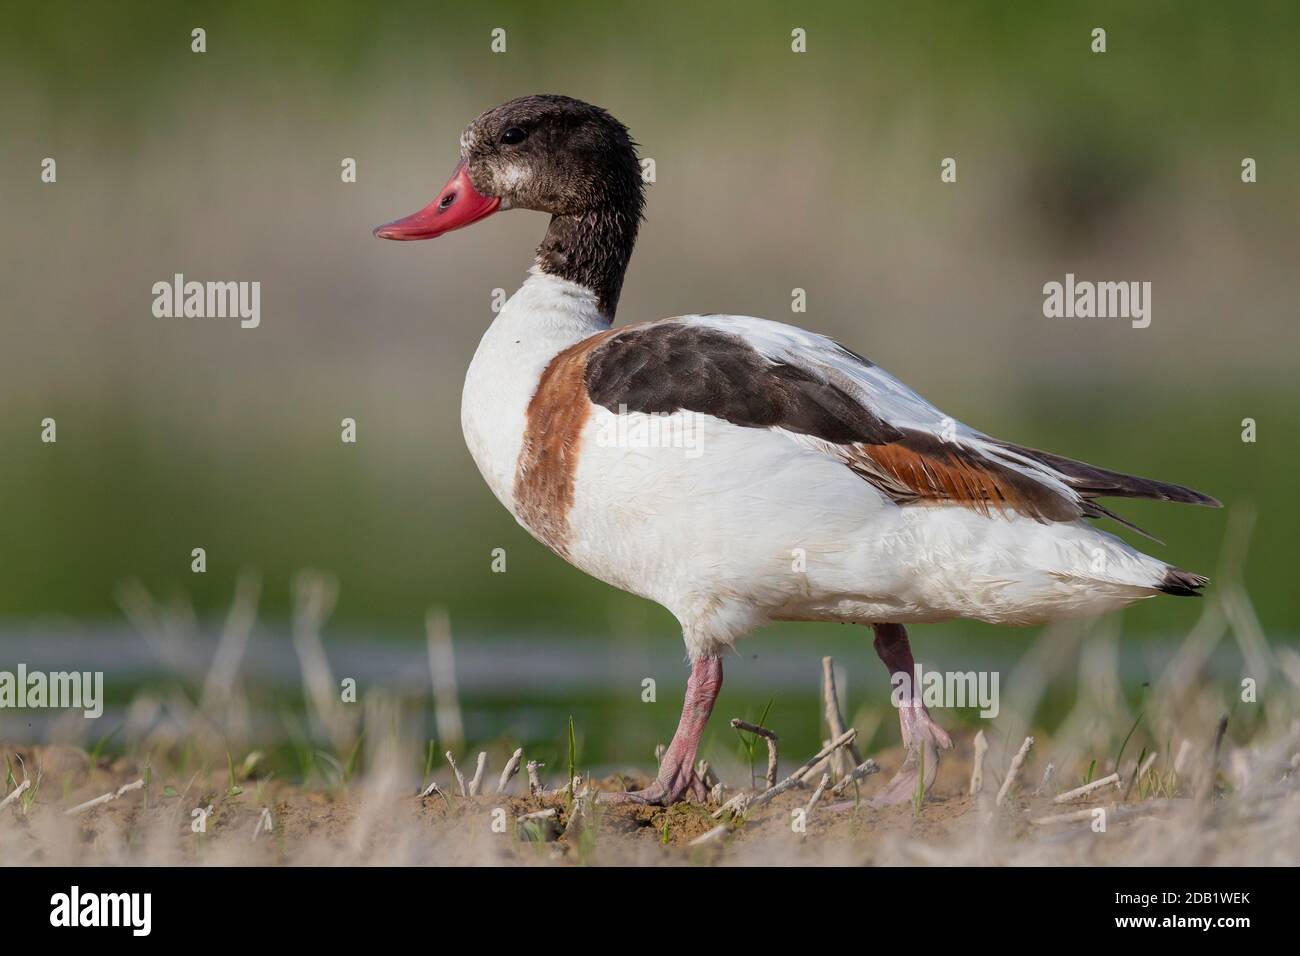 Common Shelduck (Tadorna tadorna), side view of a second cy juvenile standing on the ground, Campania, Italy Stock Photo